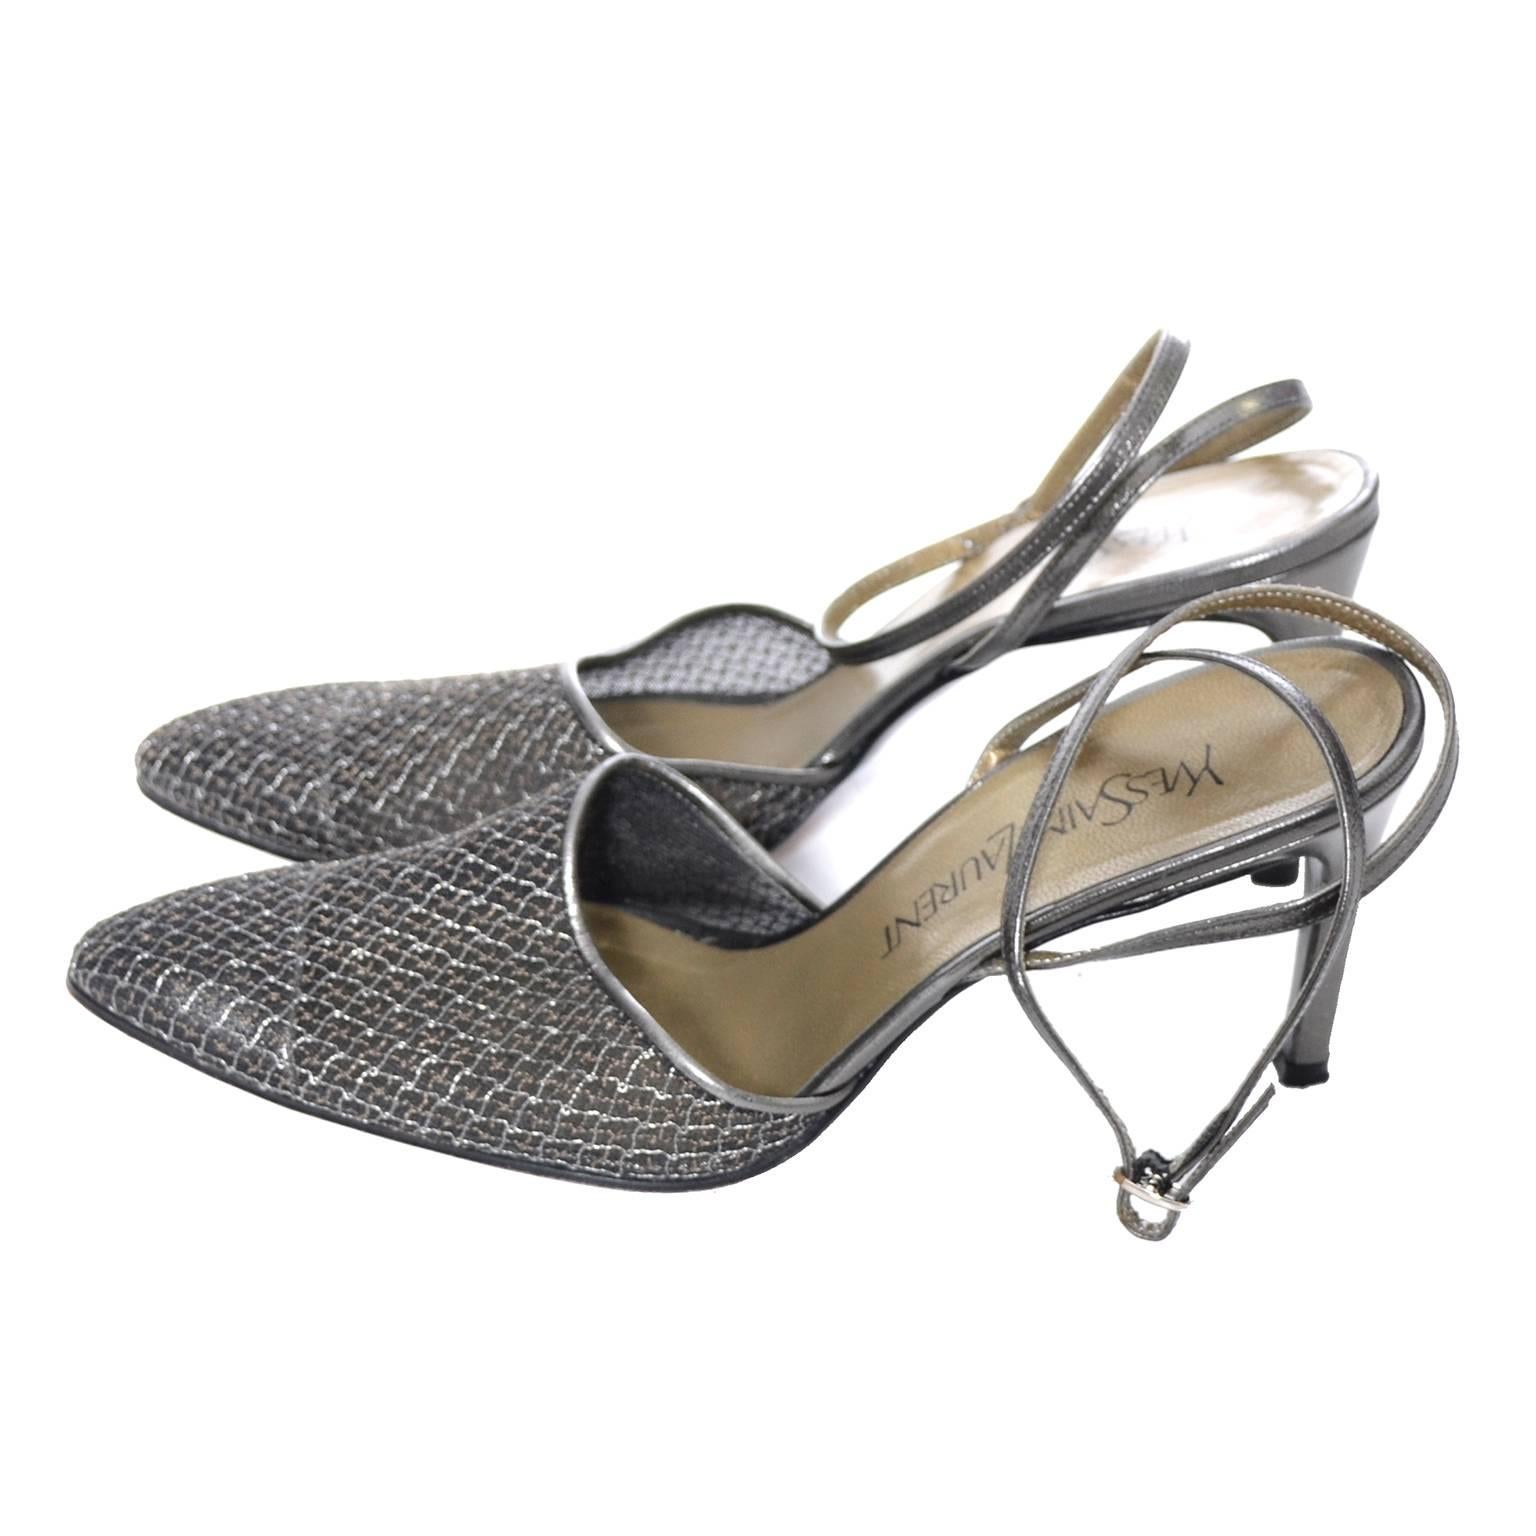 Pretty mesh ankle strap heels from Yves Saint Laurent. These shoes have only minor sole scuffs to indicate they've been worn - made with pretty pewter mesh and smooth leather.  They are marked a size 7.5 M and measure just under 3 inches at the